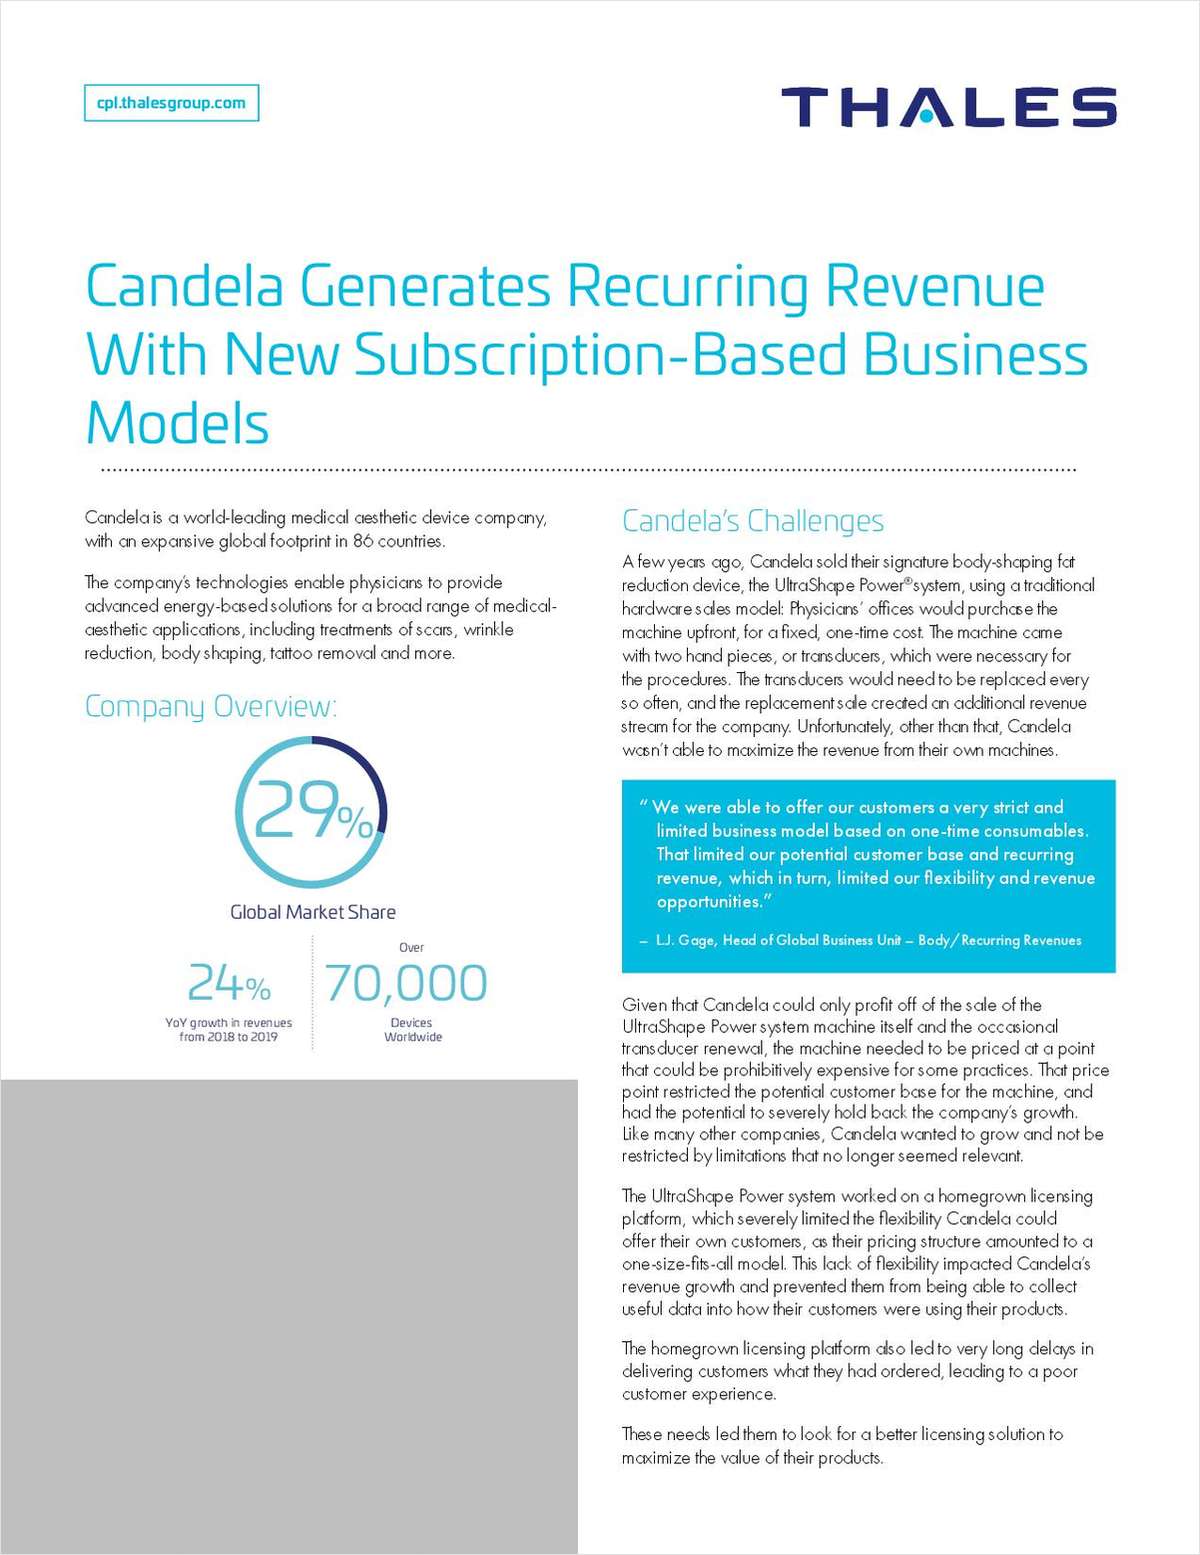 Candela Generates Recurring Revenue With New Subscription-Based Business Models